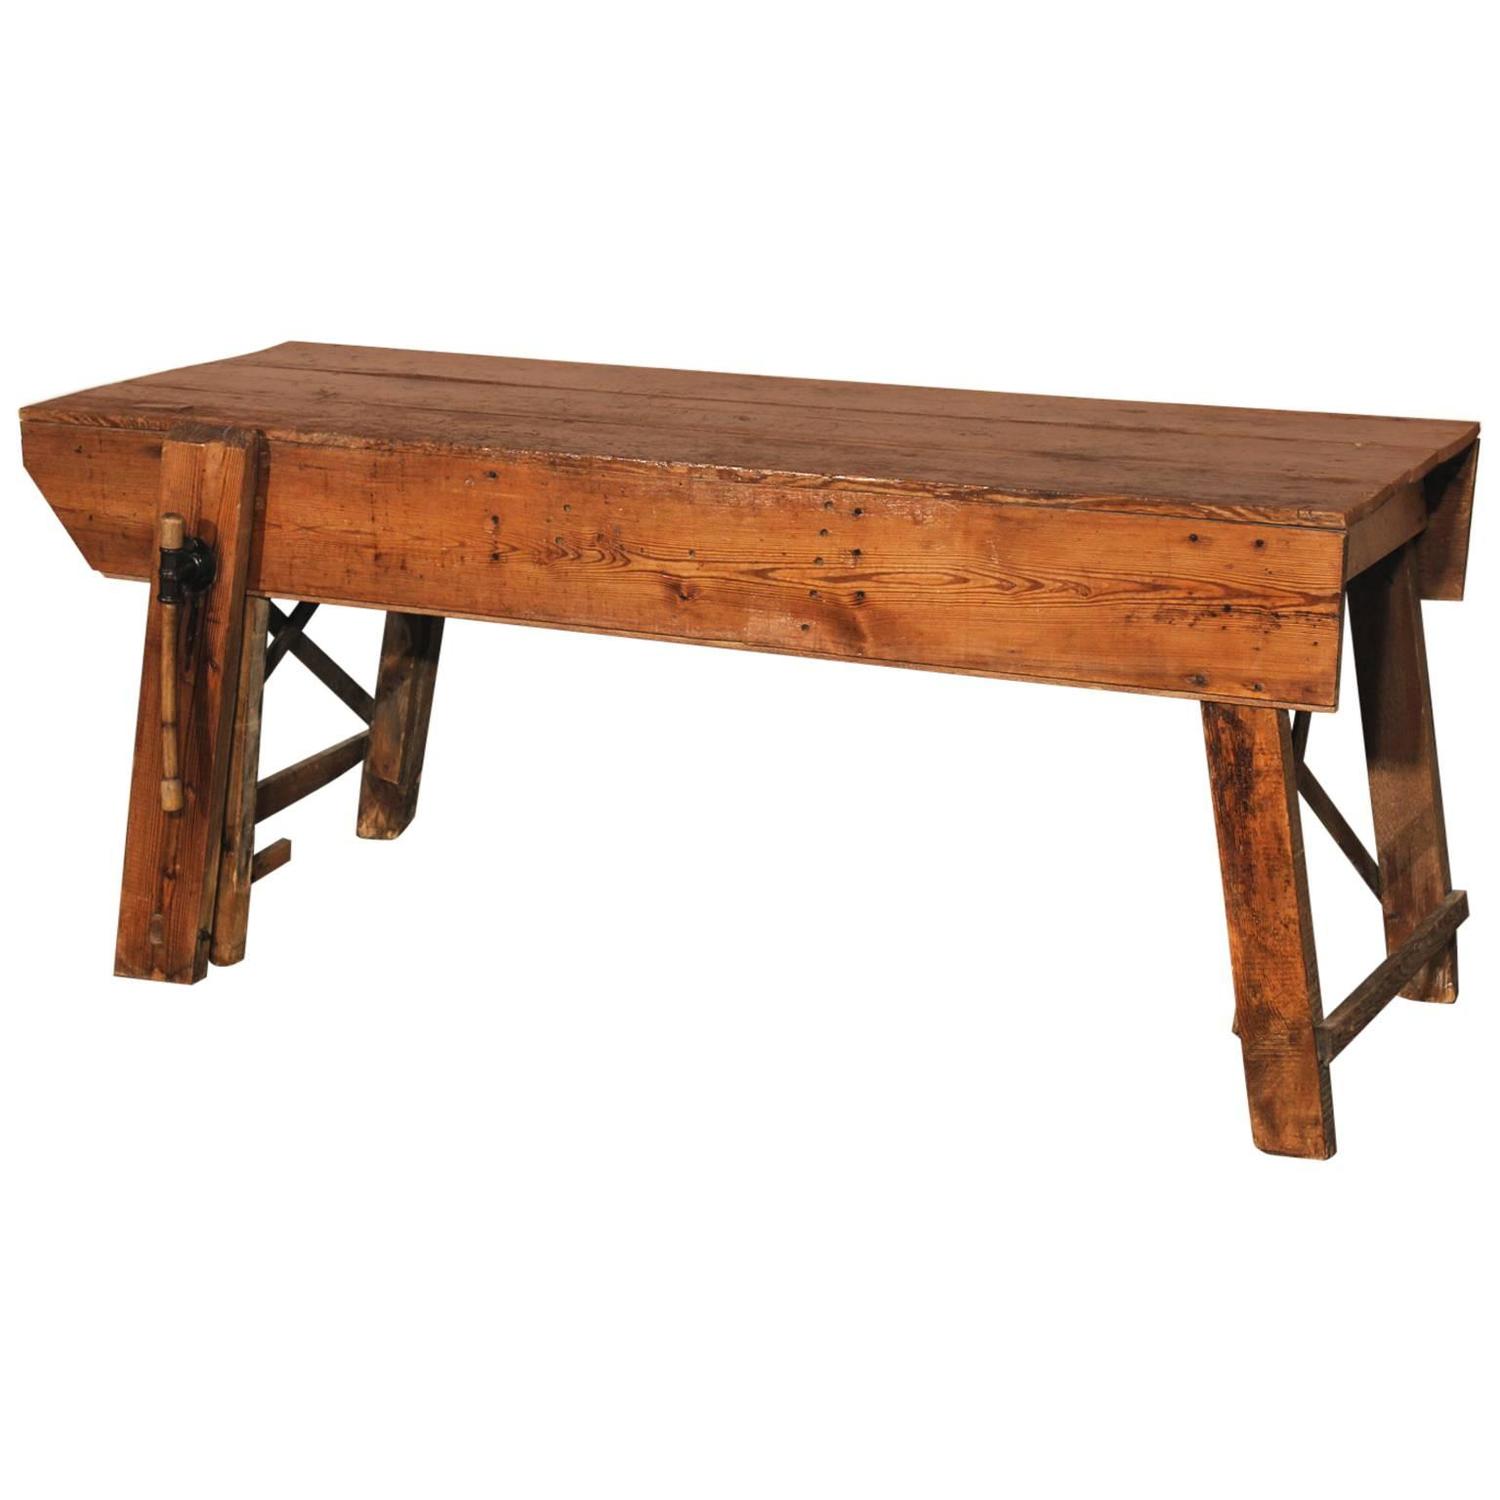 Antique Workbenches - 75 For Sale on 1stdibs